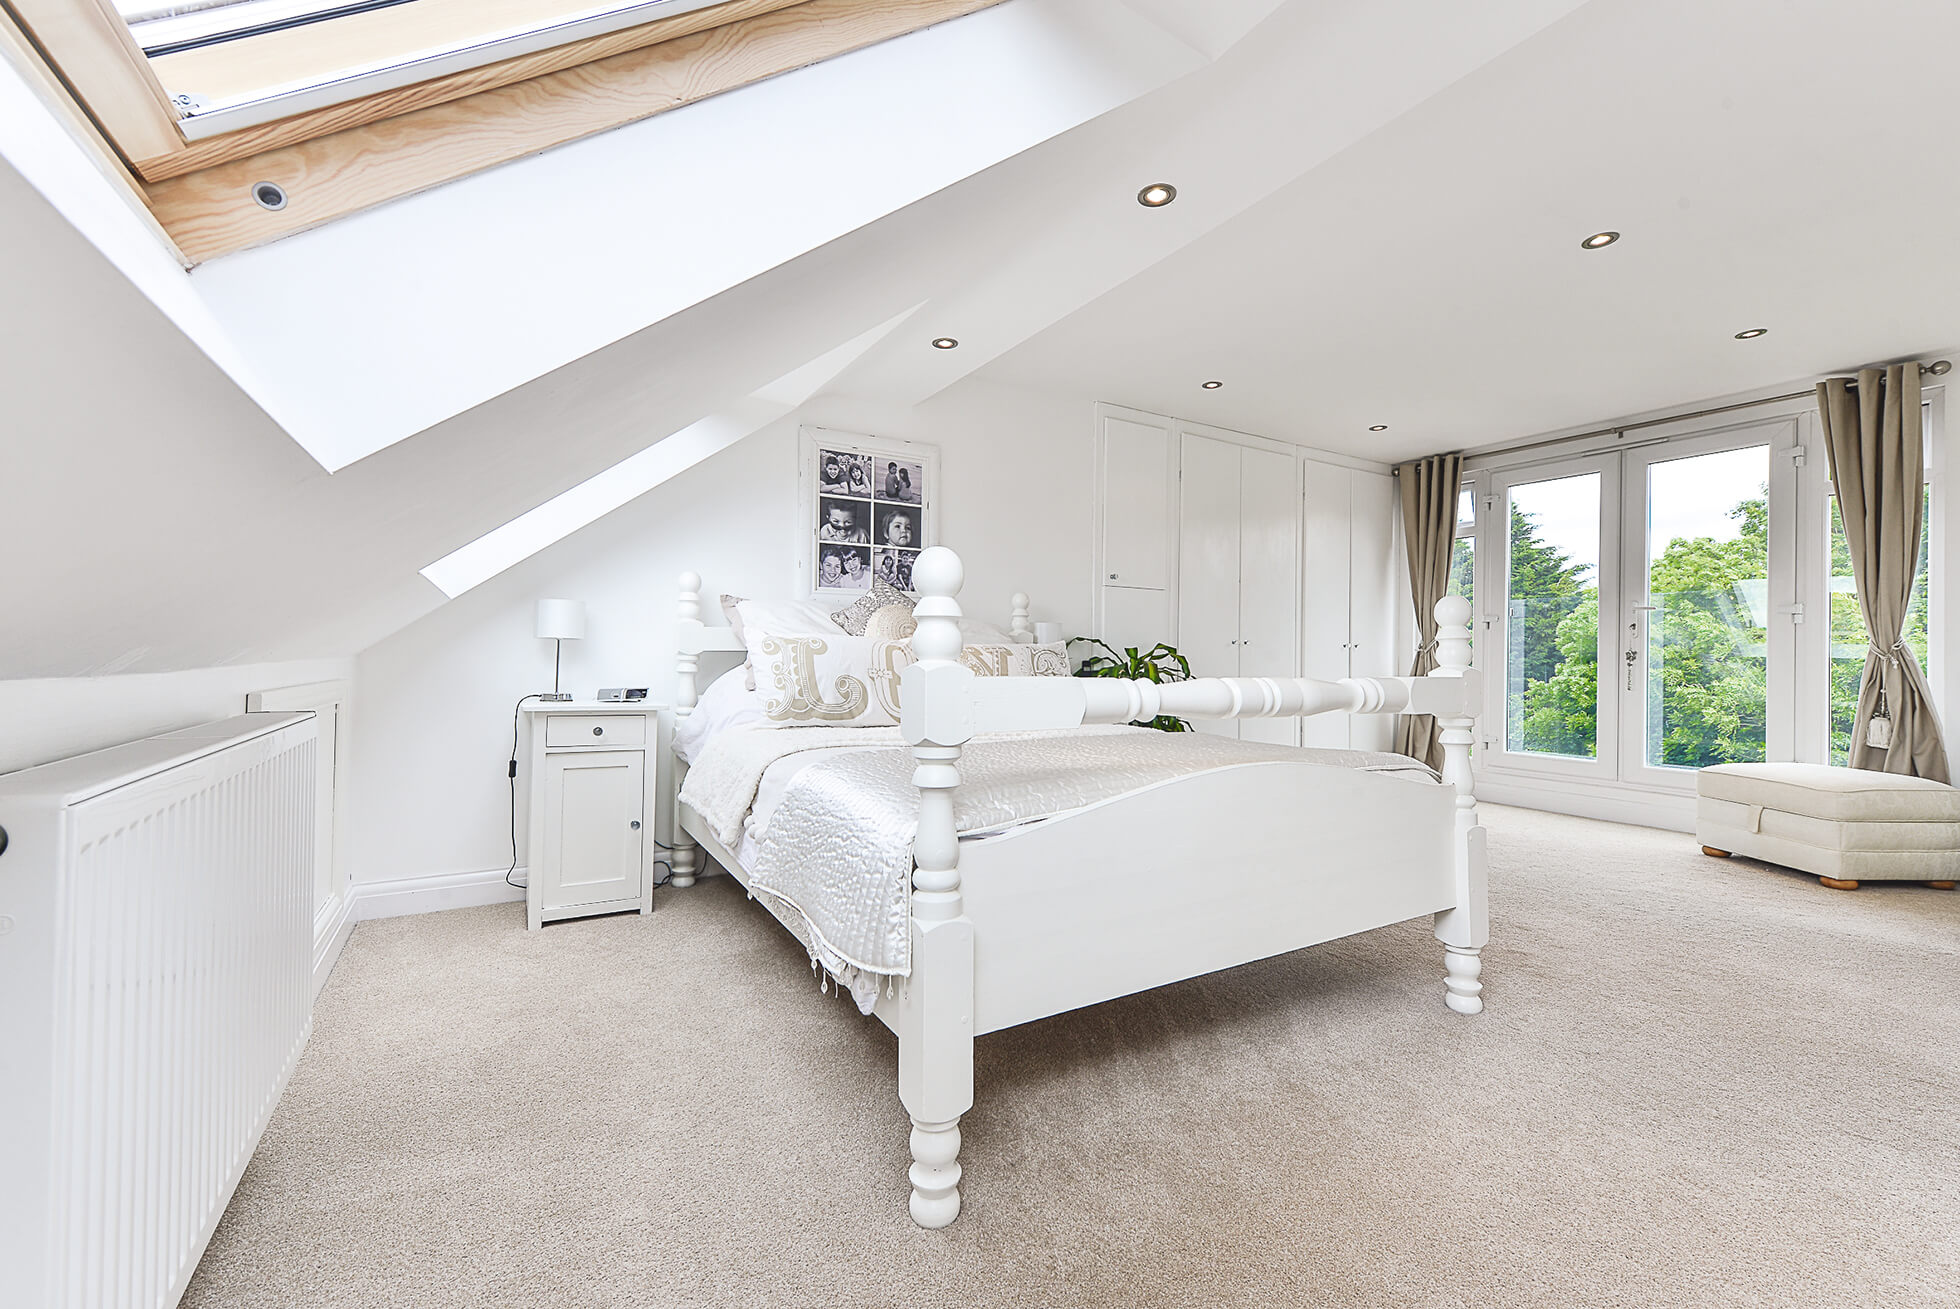 Do you have a question about converting your Loft in Whempstead? Here are the most popular questions asked by our clients.